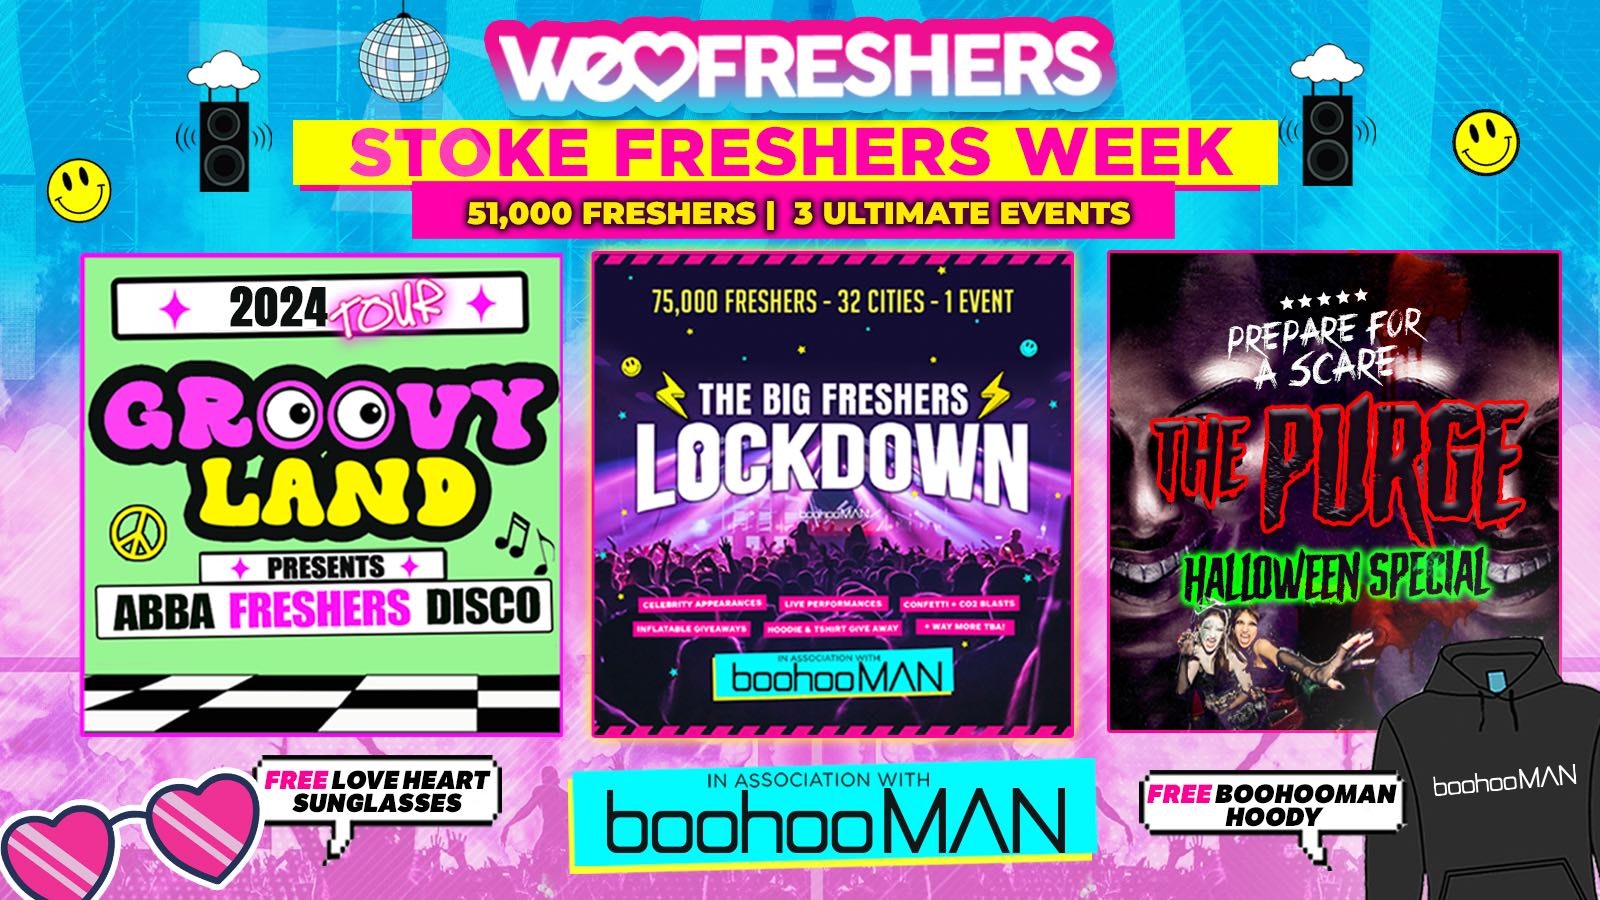 WE LOVE STOKE FRESHERS 2024 in association with boohooMAN – 3 EVENTS❗